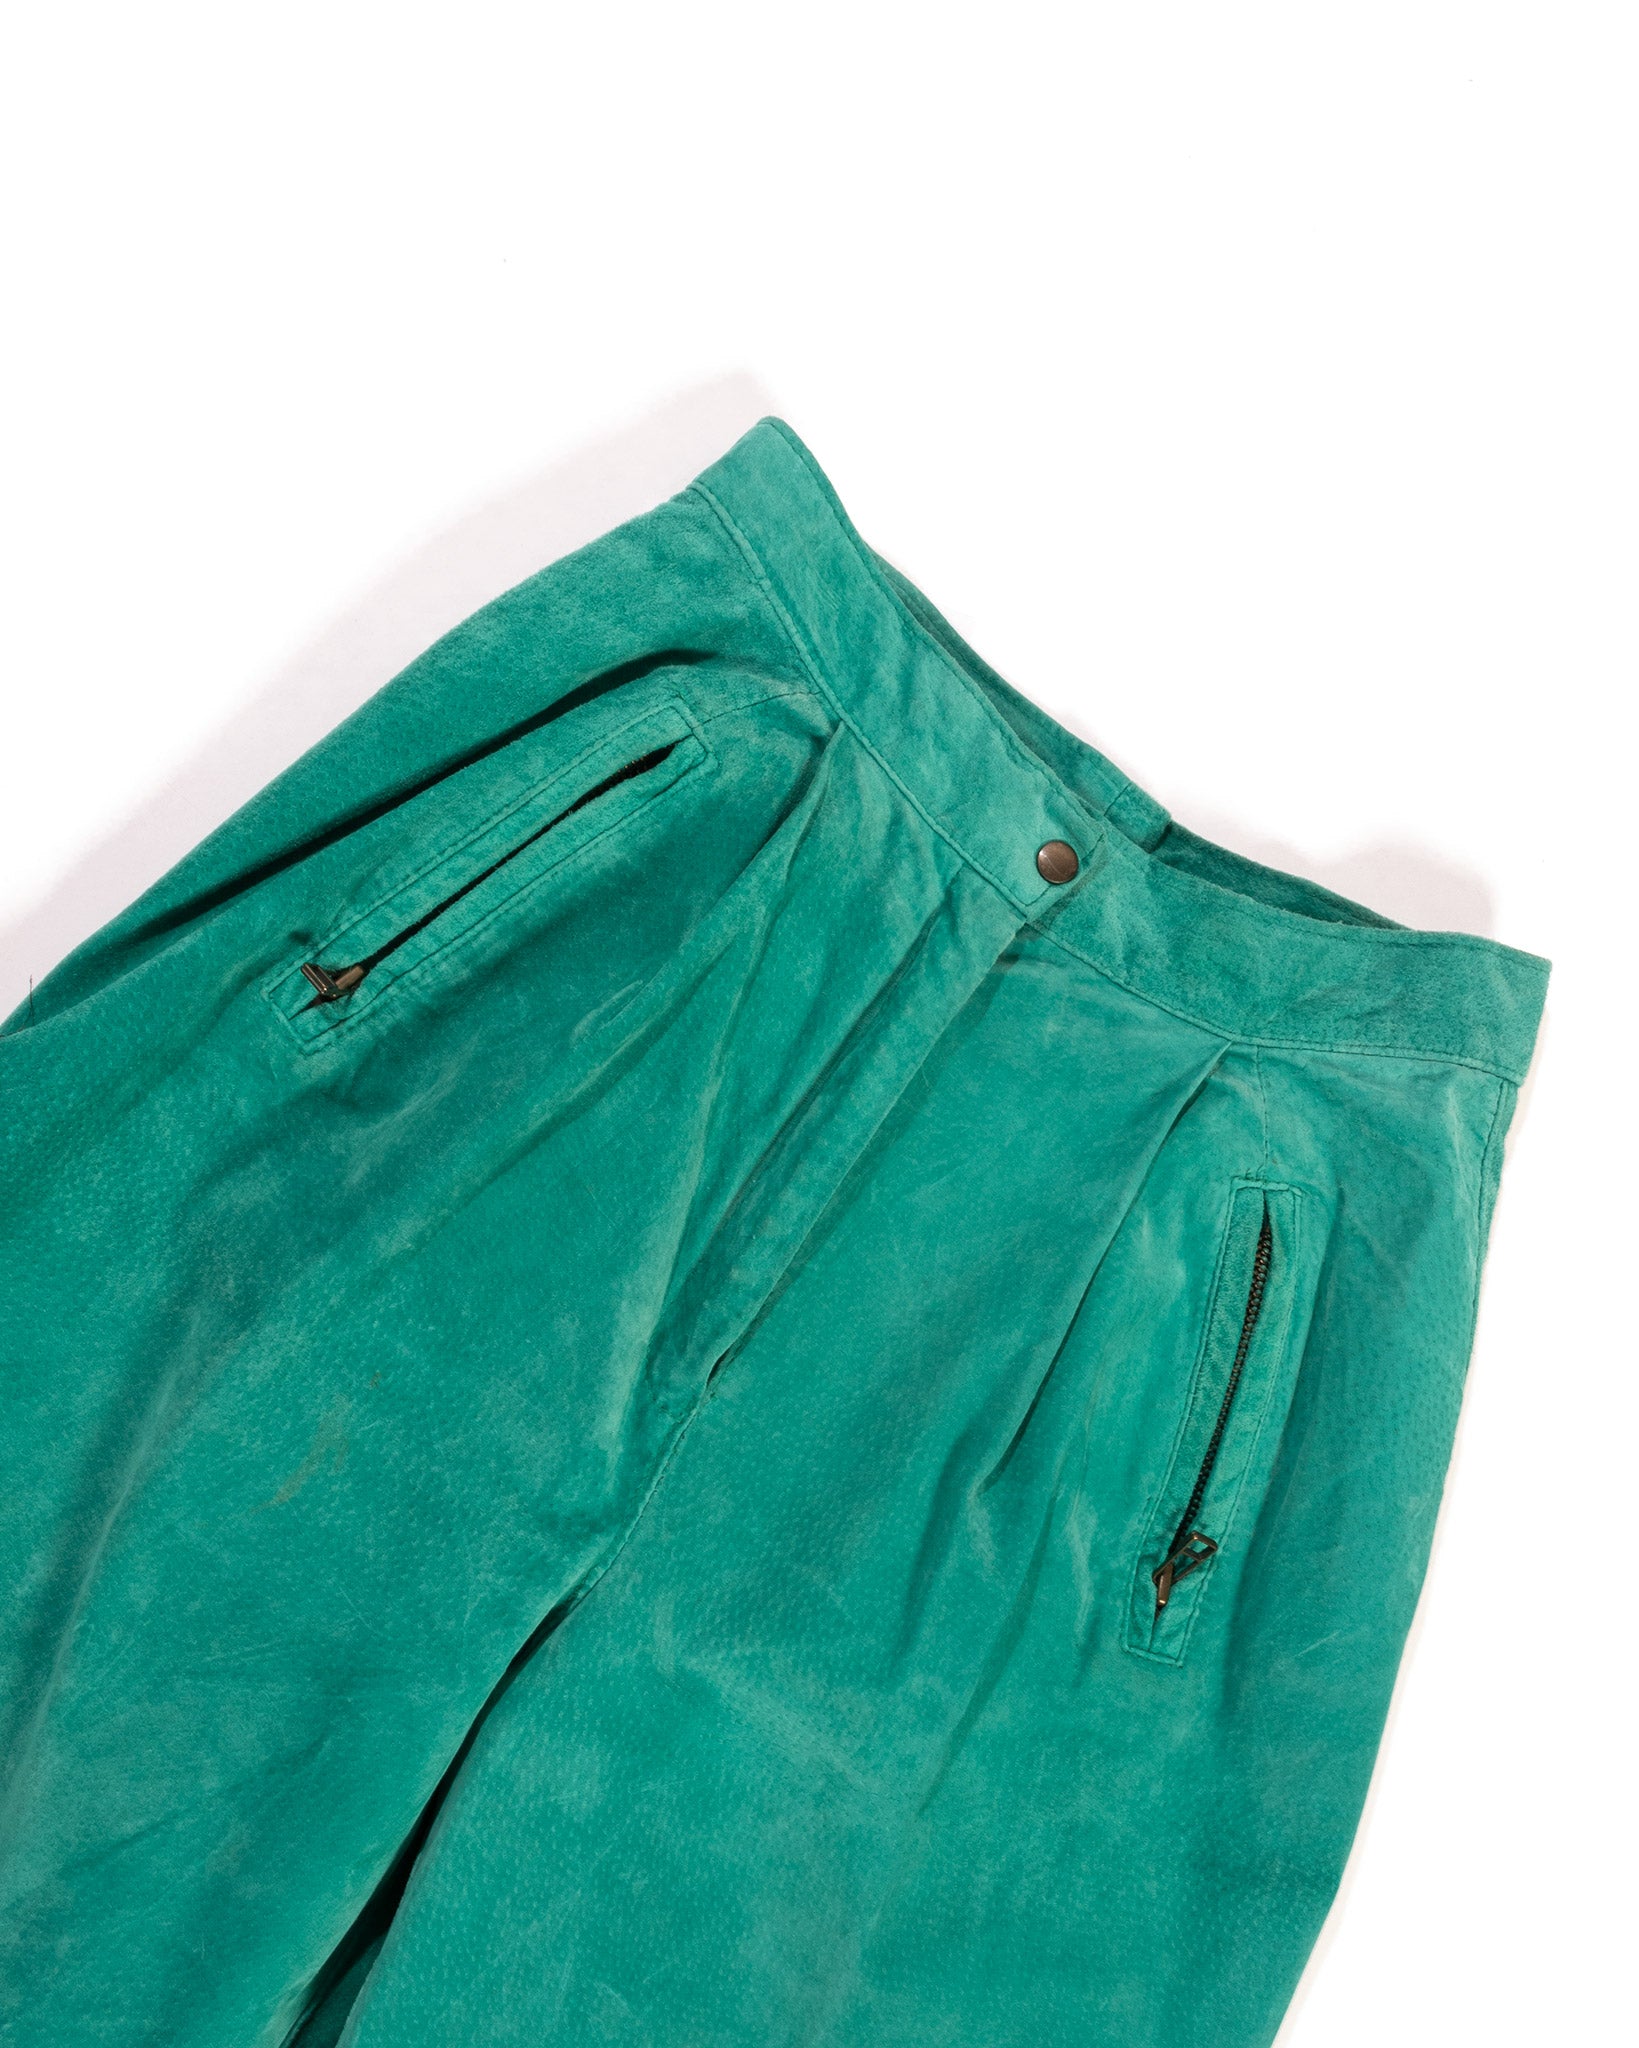 80s High Waisted Green Suede Pants with Zip Pockets – nouveaurichevintage